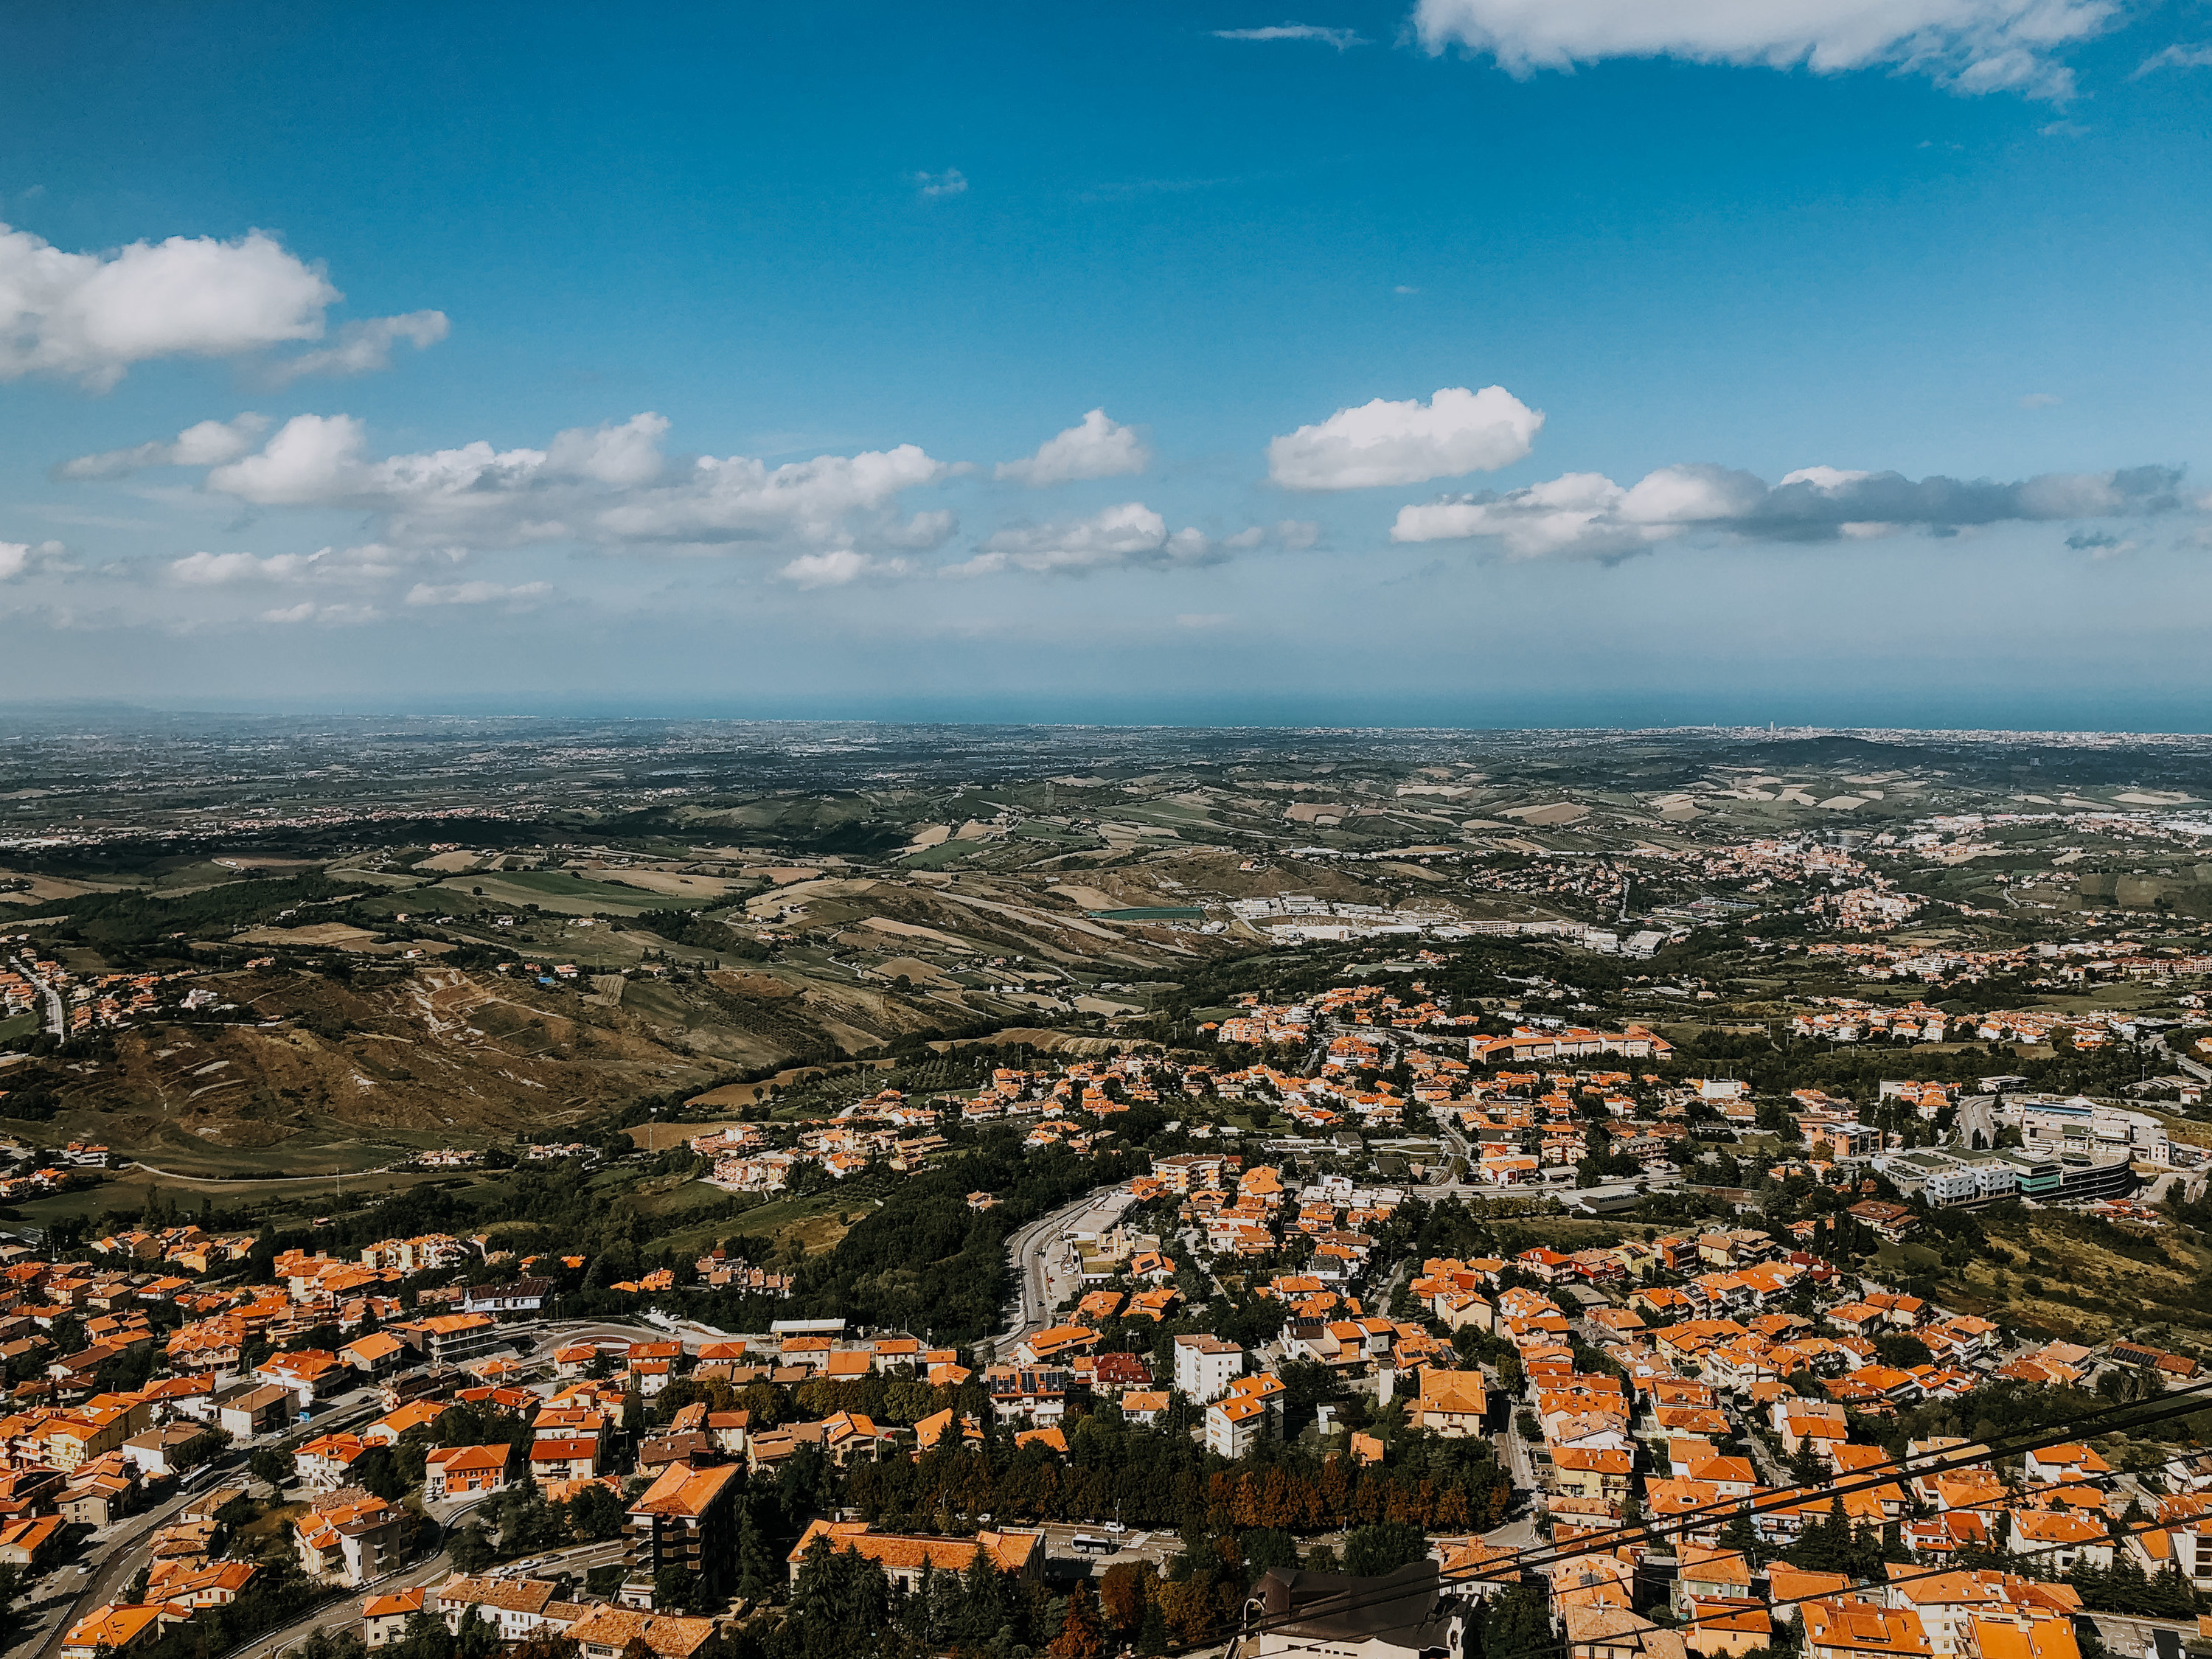 View from San Marino with houses, mountains, and the ocean in the distance